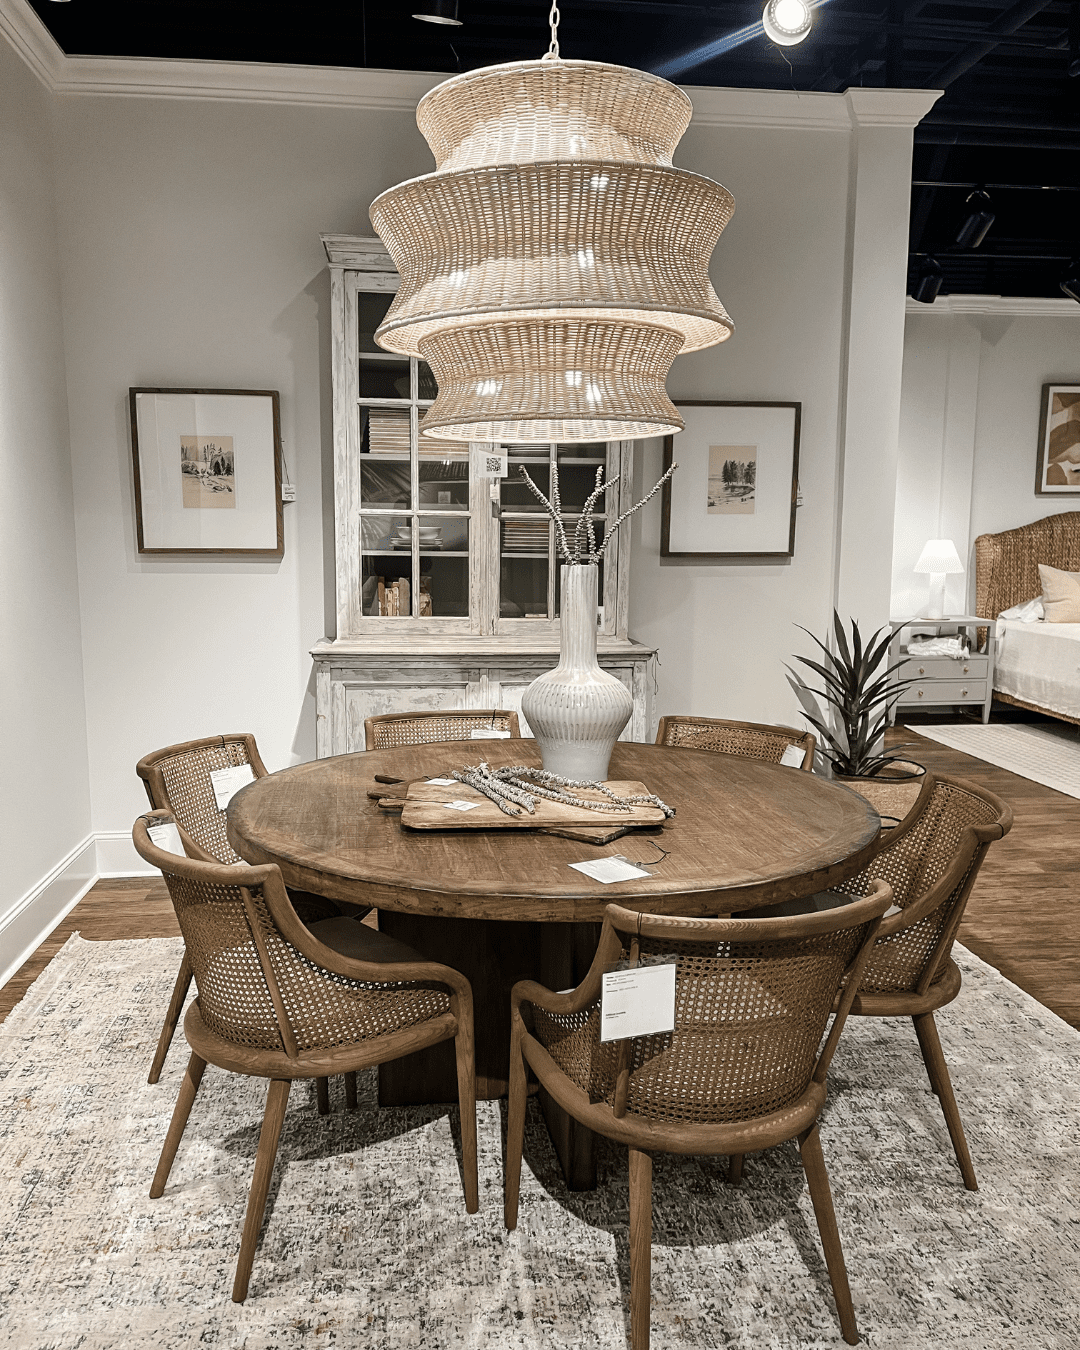 Furnitureland South help you design your space with dining table